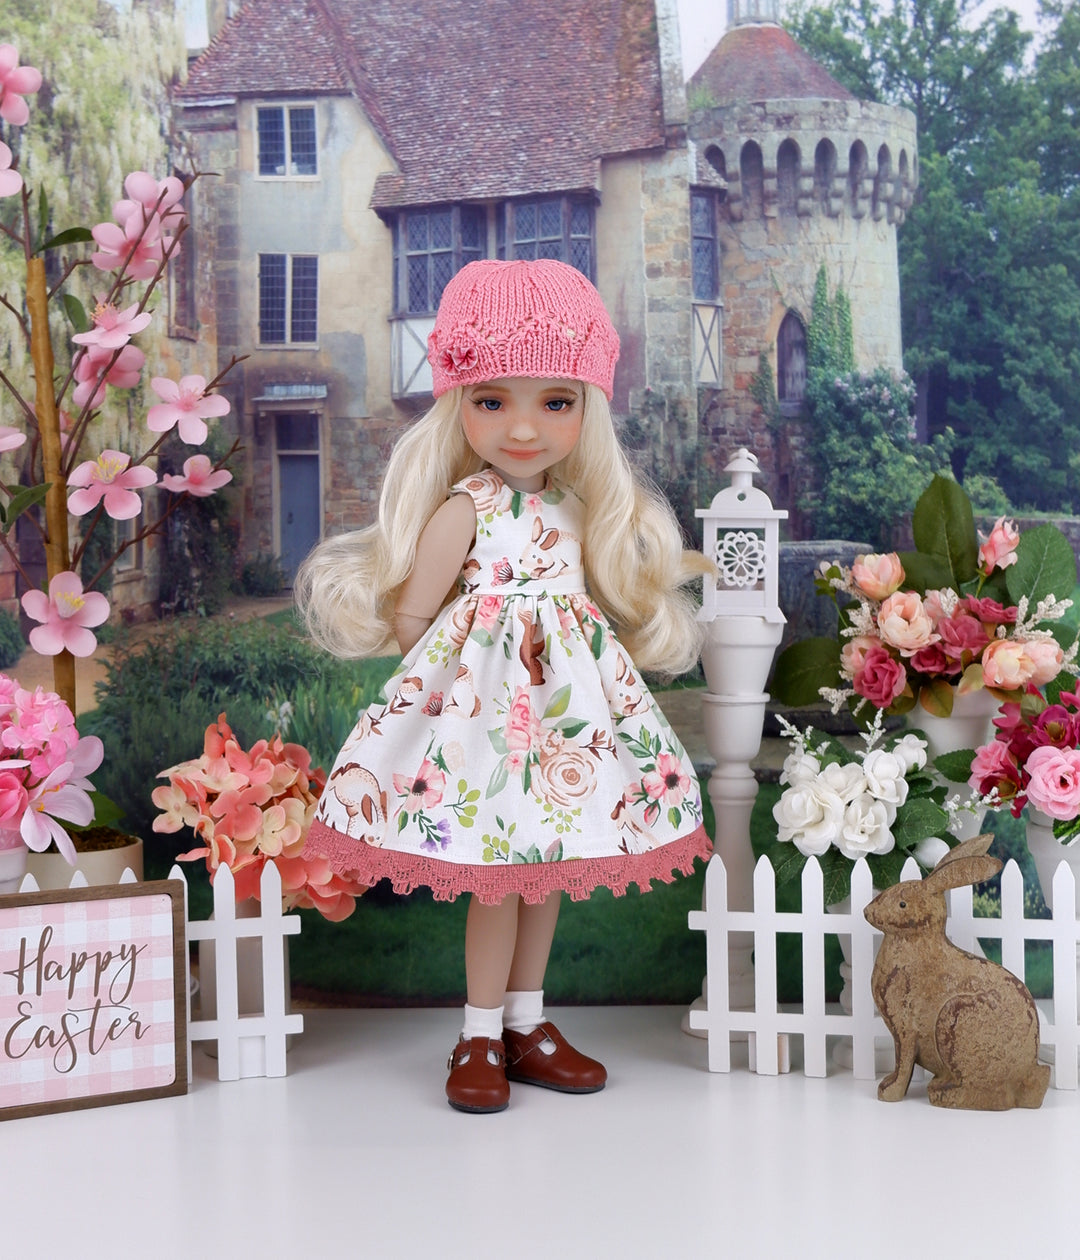 Wee Brown Bunny - dress and sweater set with shoes for Ruby Red Fashion Friends doll